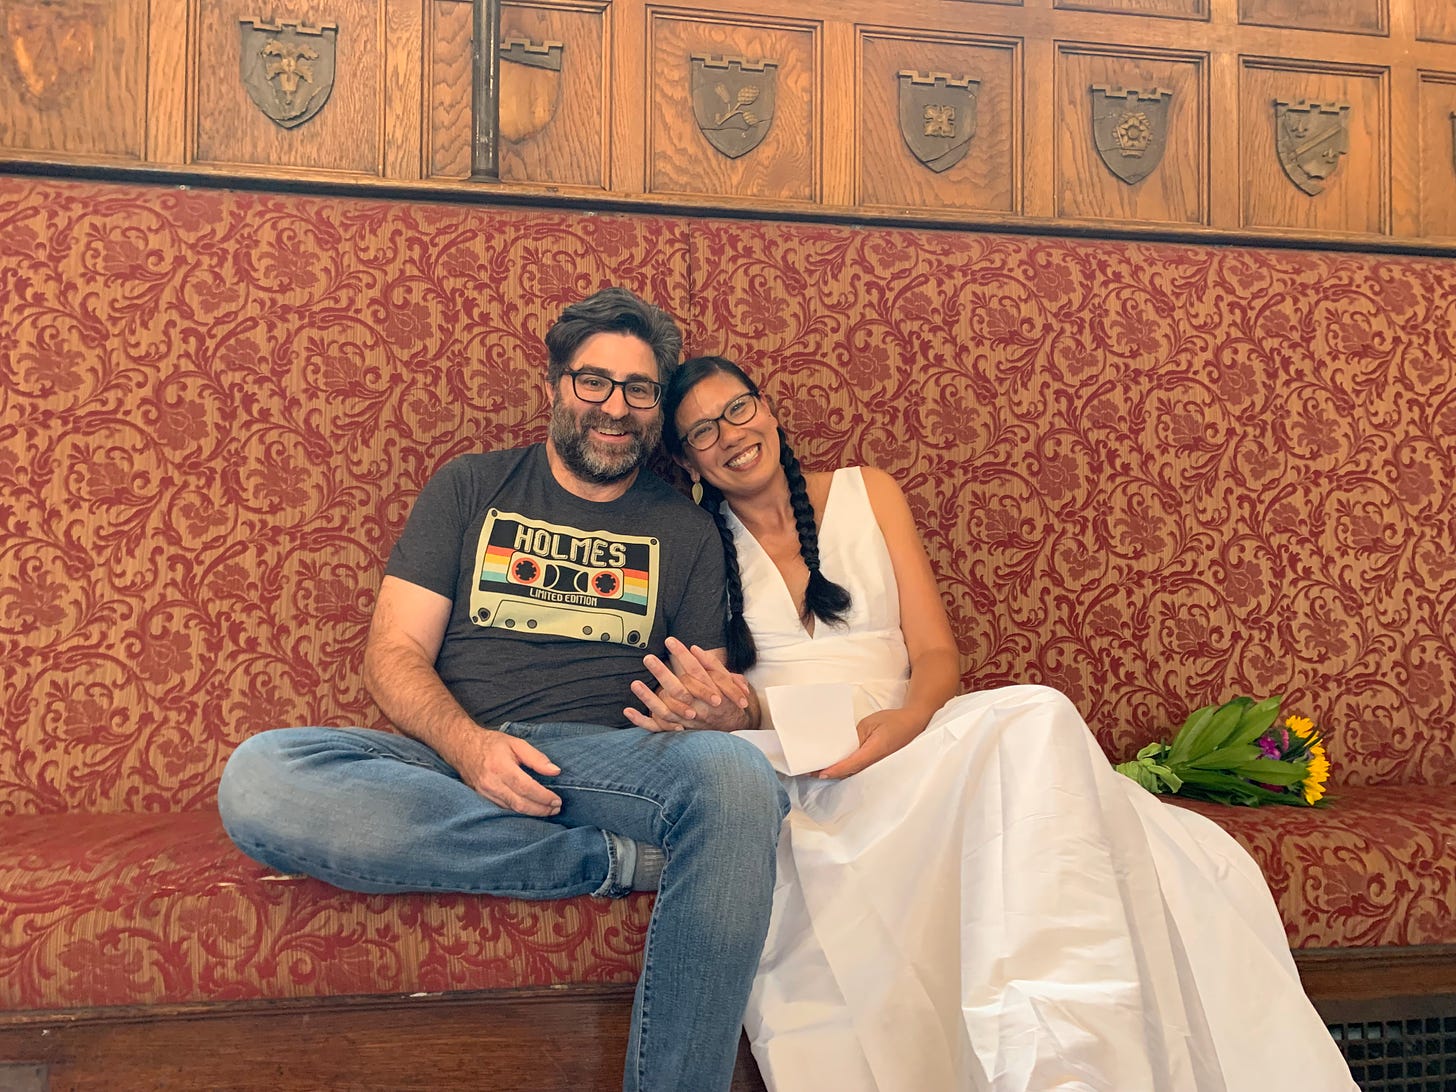 Chris and Pam sit together on an ornate bench against a wall. They lean into eachother and hold hands. They're smiling. Chris is a white man with a salt and pepper short hair and a beard and glasses. Pam is a Filipina American woman with long dark hair in braids.